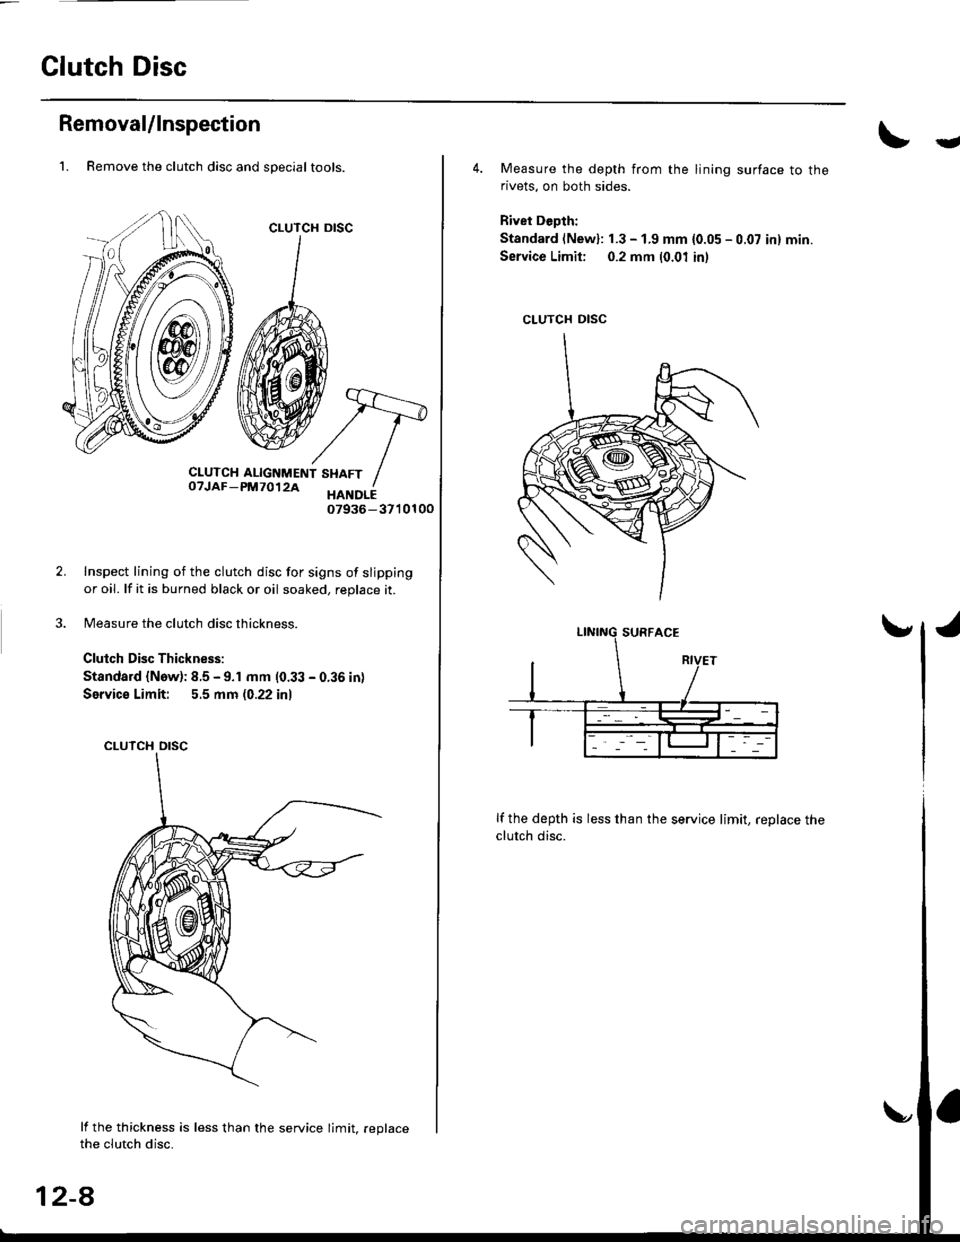 HONDA CIVIC 1996 6.G Owners Guide Clutch Disc
RemovaUlnspection
2.
1. Remove the clutch disc and special tools.
CLUTCH
CLUTCH ALIGNMENT SHAFToTJAF-pM7012A xltori07936-3710100
Inspect lining of the clutch disc for signs of slipping
or